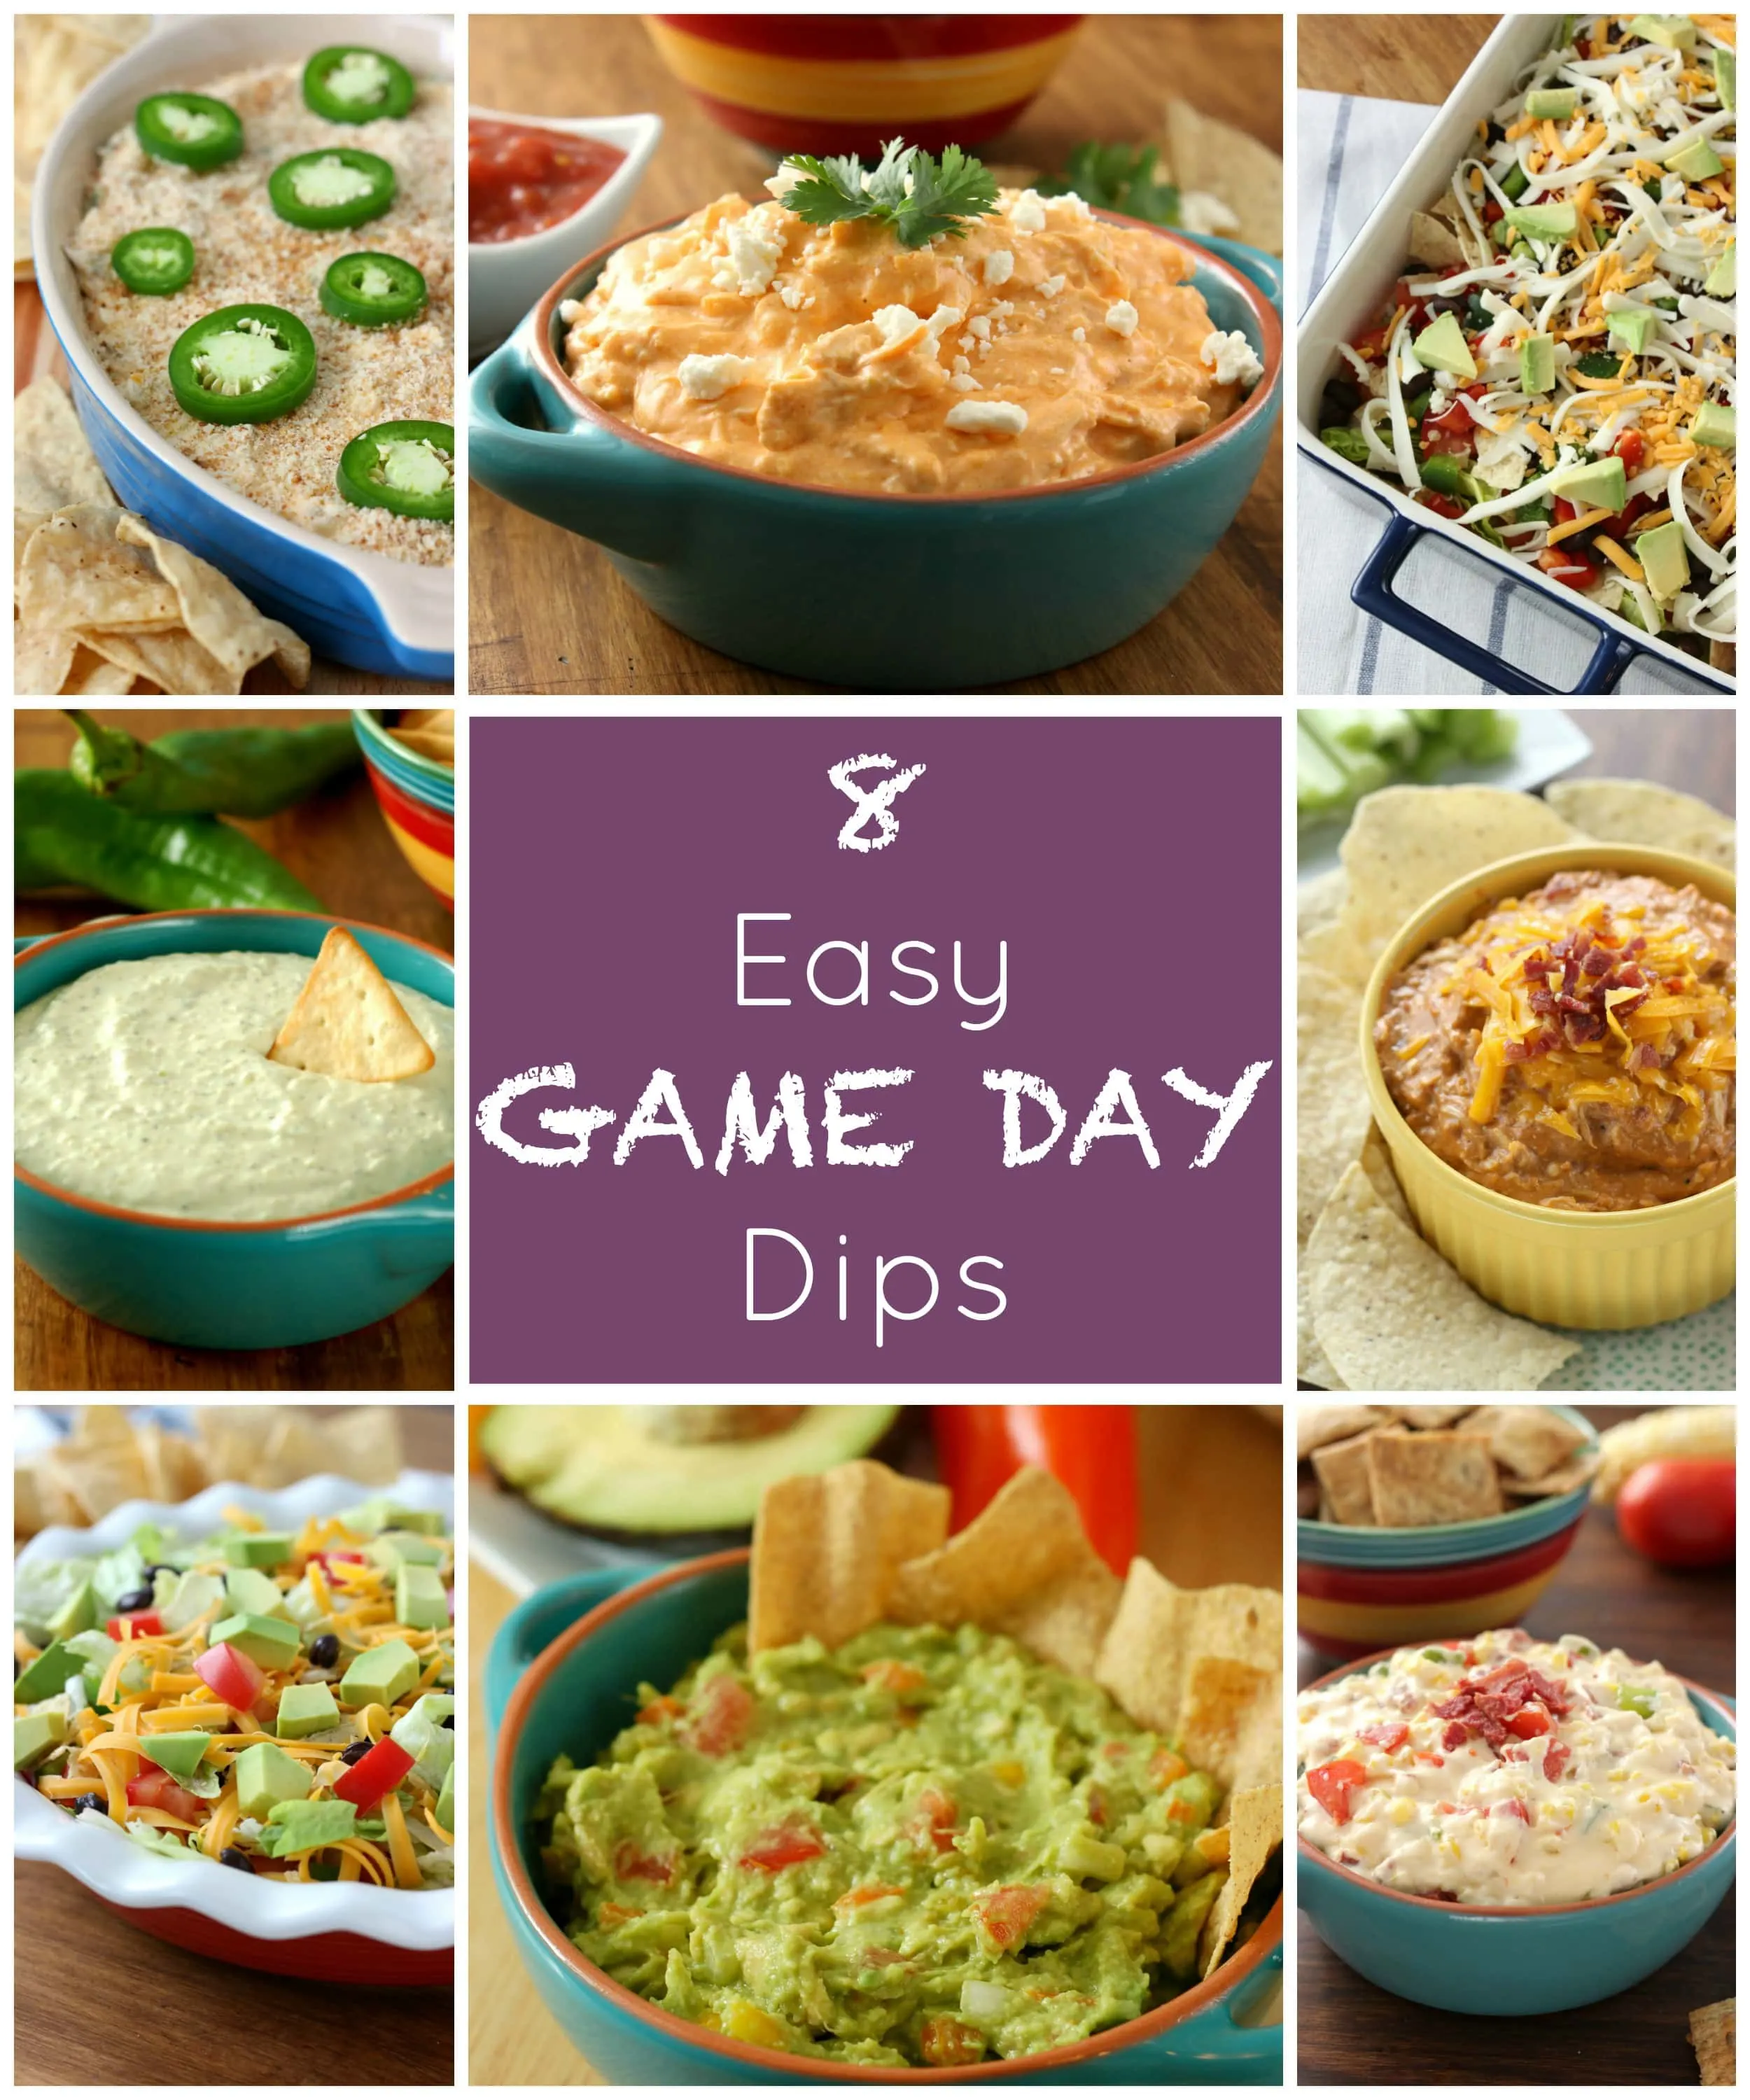 8 Easy Game Day Dips from A Kitchen Addiction